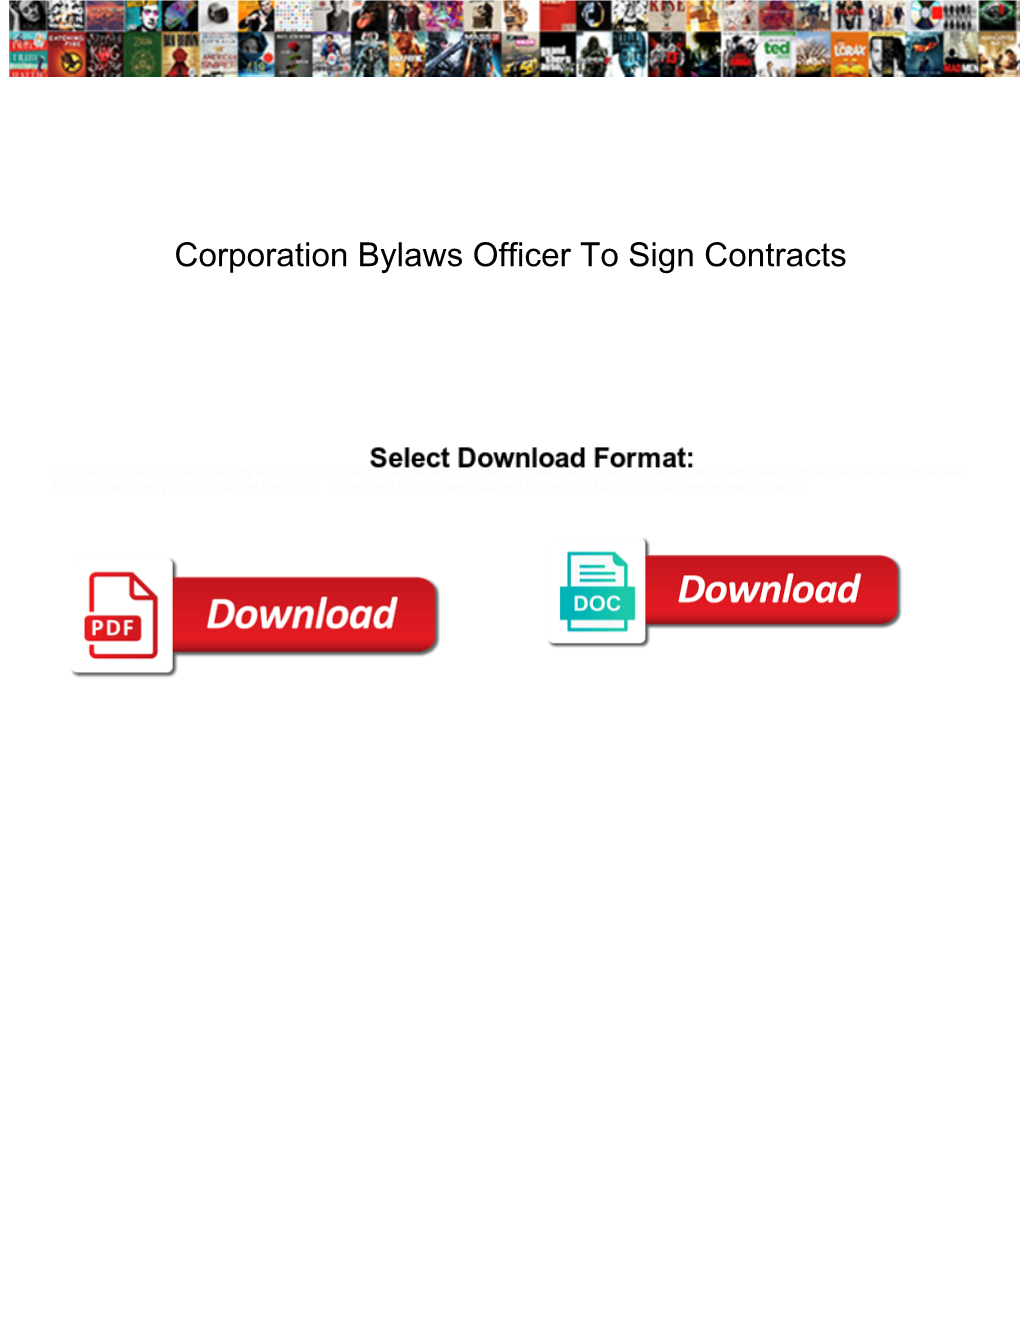 Corporation Bylaws Officer to Sign Contracts